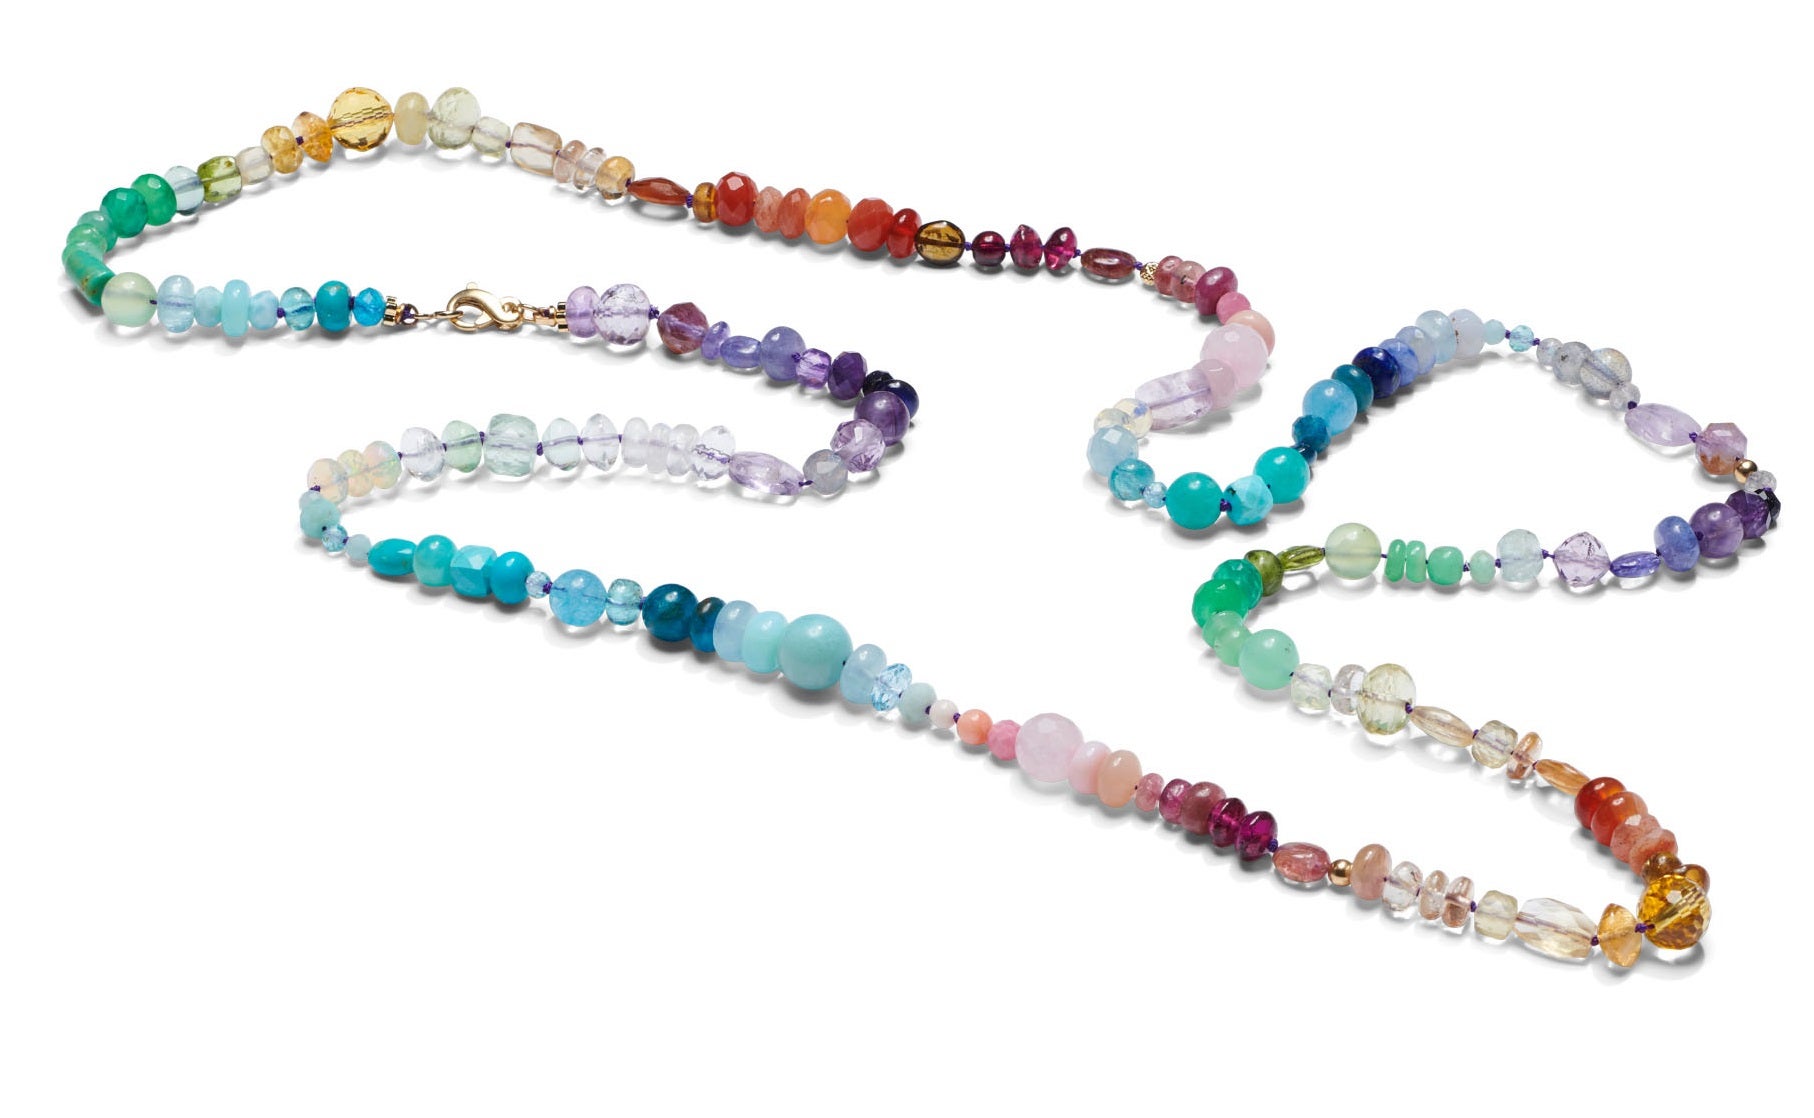 Drench yourself in an endless sprakling rainbow. This extra long precious necklace can be wrapped around your neck twice. This handmade necklace enriched with the following gemstones such as;

• Sapphires
• Swiss topaz
• Ethiopian Welo opal
• Afghan